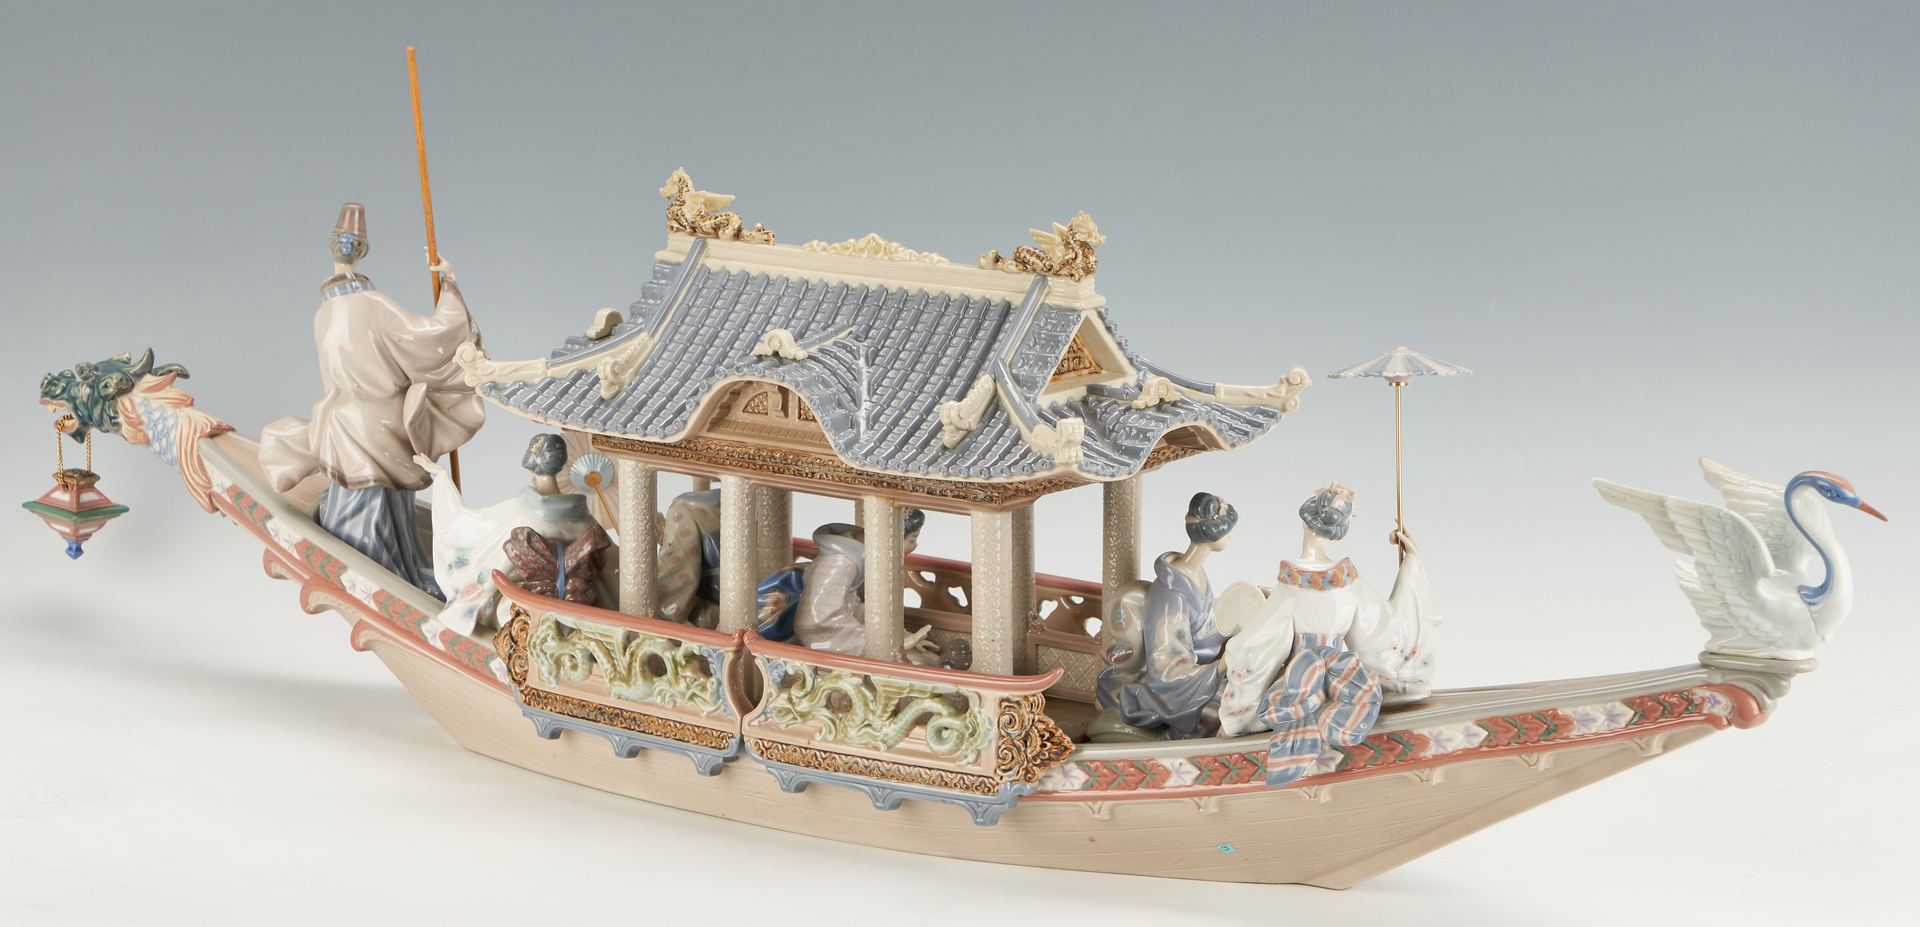 Lot 941: Limited Edition Lladro Porcelain Group, Kitakami Cruise